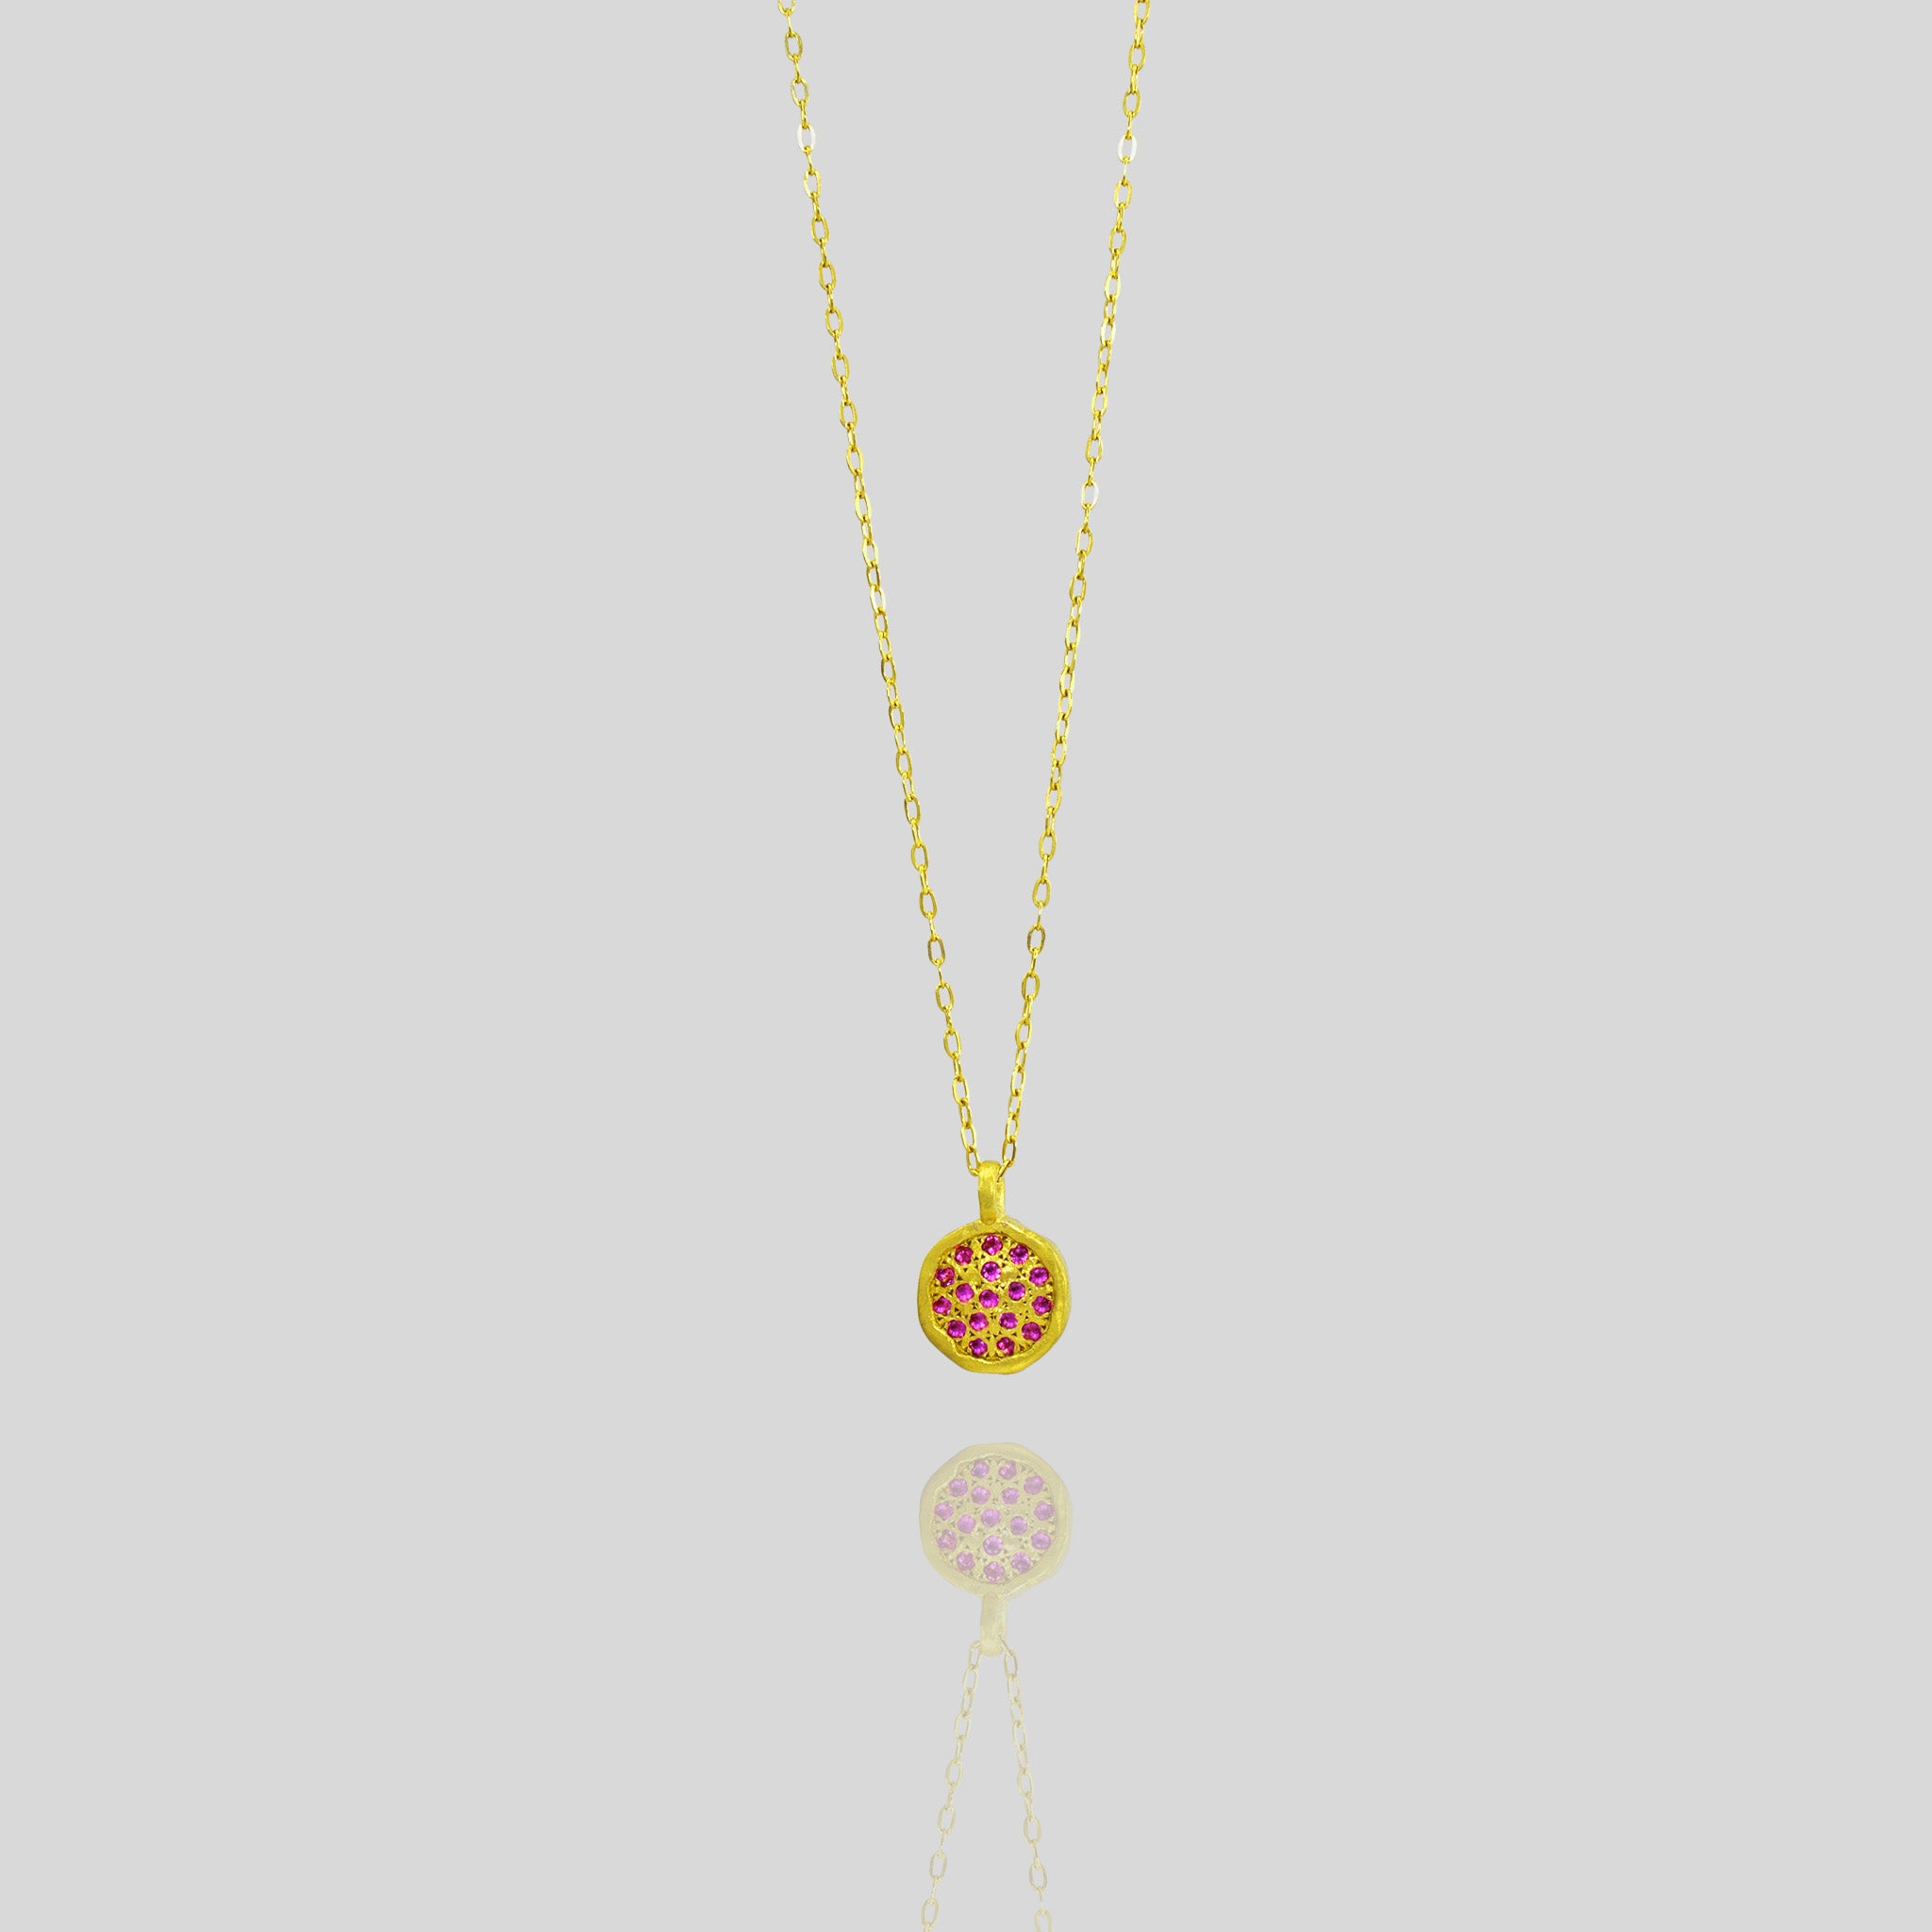 Starlit gold pendant, exquisitely handmade from Yellow Gold, featuring a small gold plate lavishly adorned with scattered Rubies, evoking visions of a vibrant starry night.